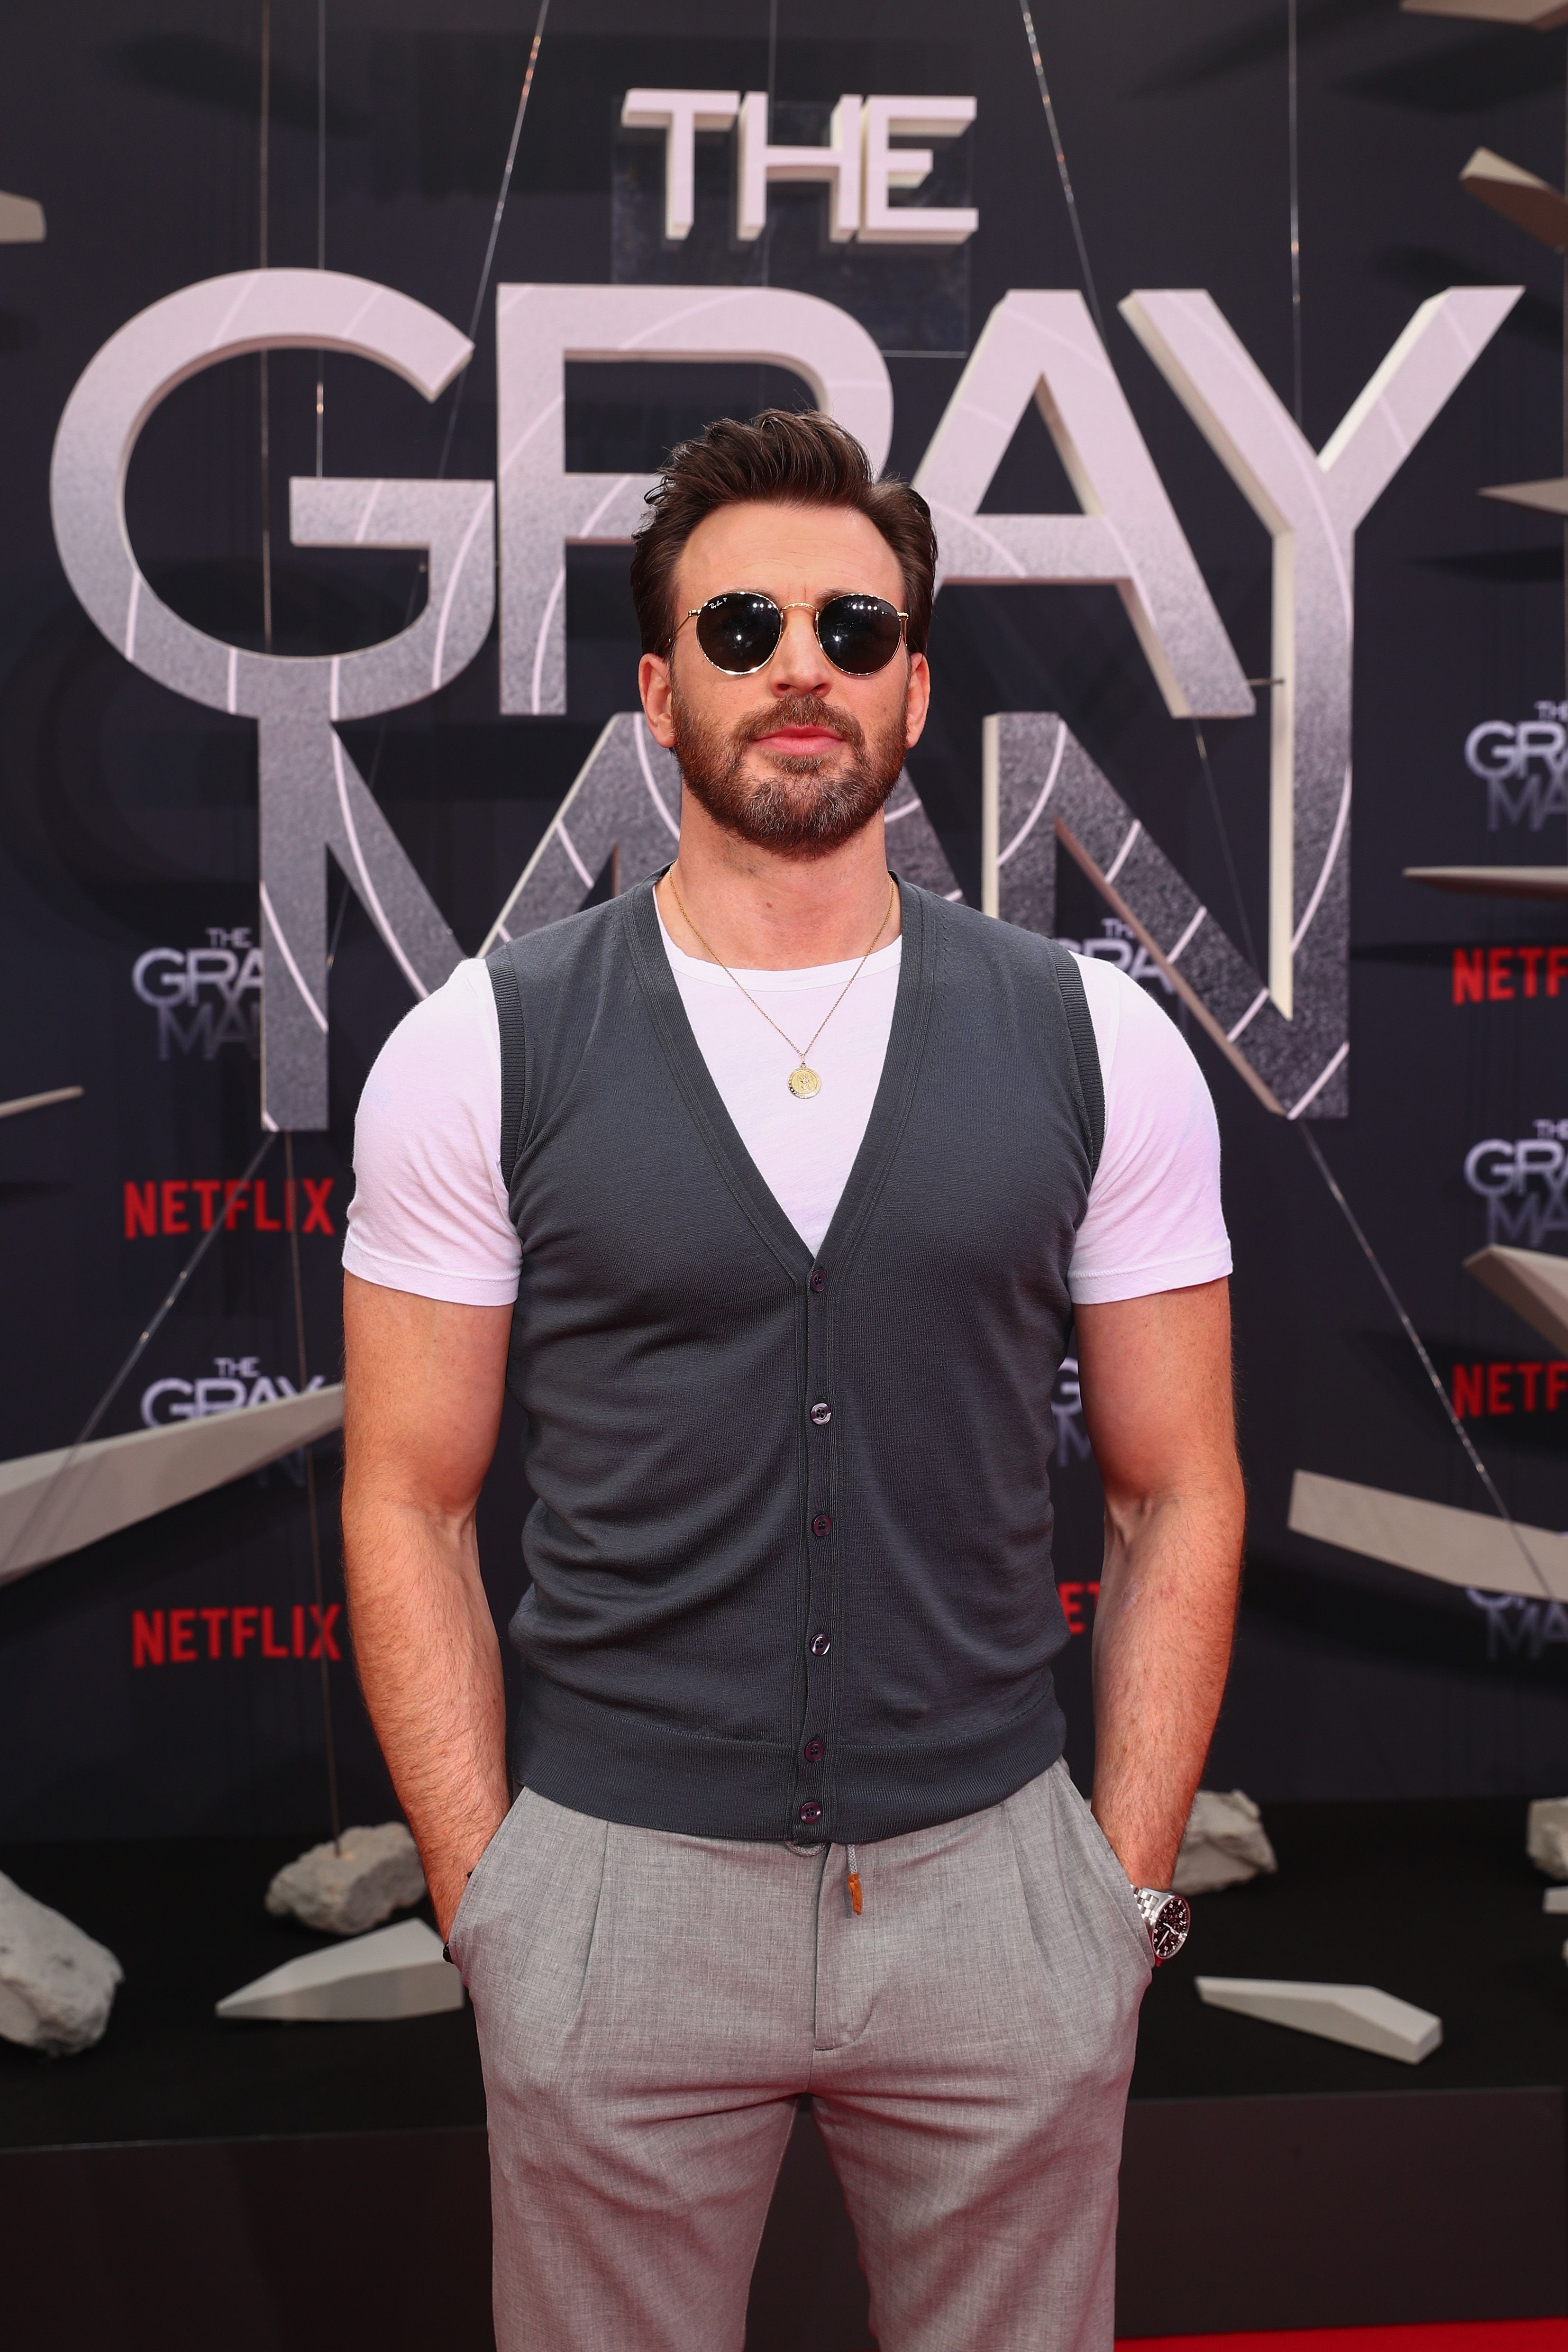 Closeup of Chris Evans at a movie premiere in a t-shirt, sweater vest, and slacks